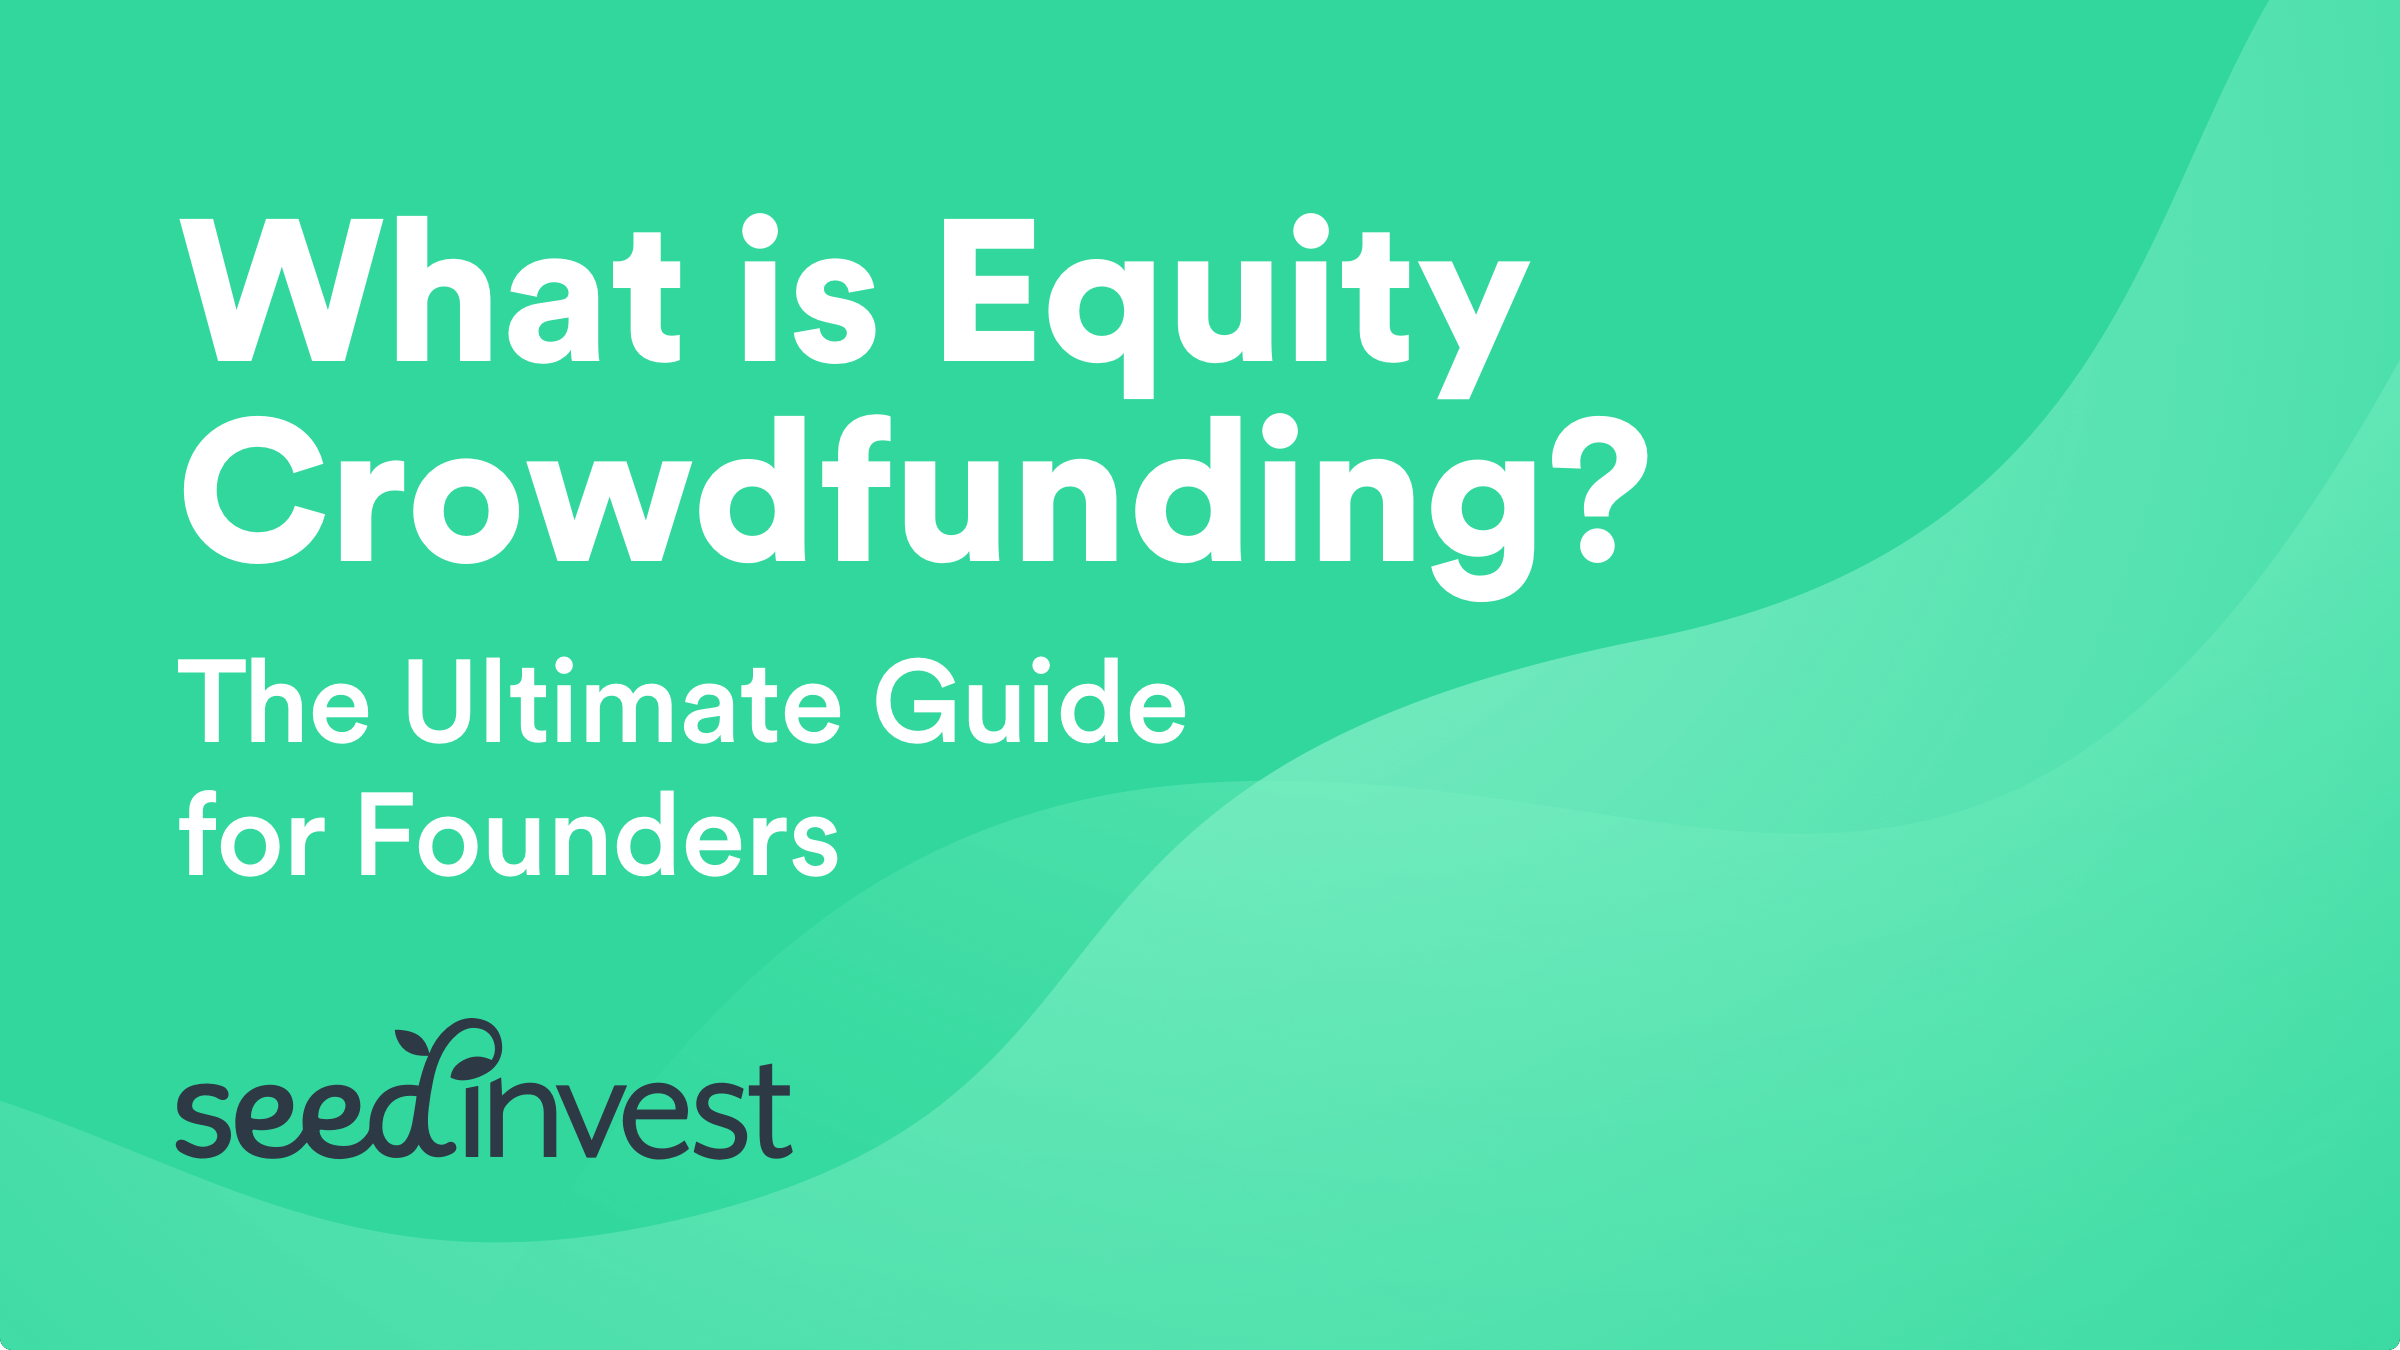 EC_What_Is_Equity_Crowdfunding_Post-1